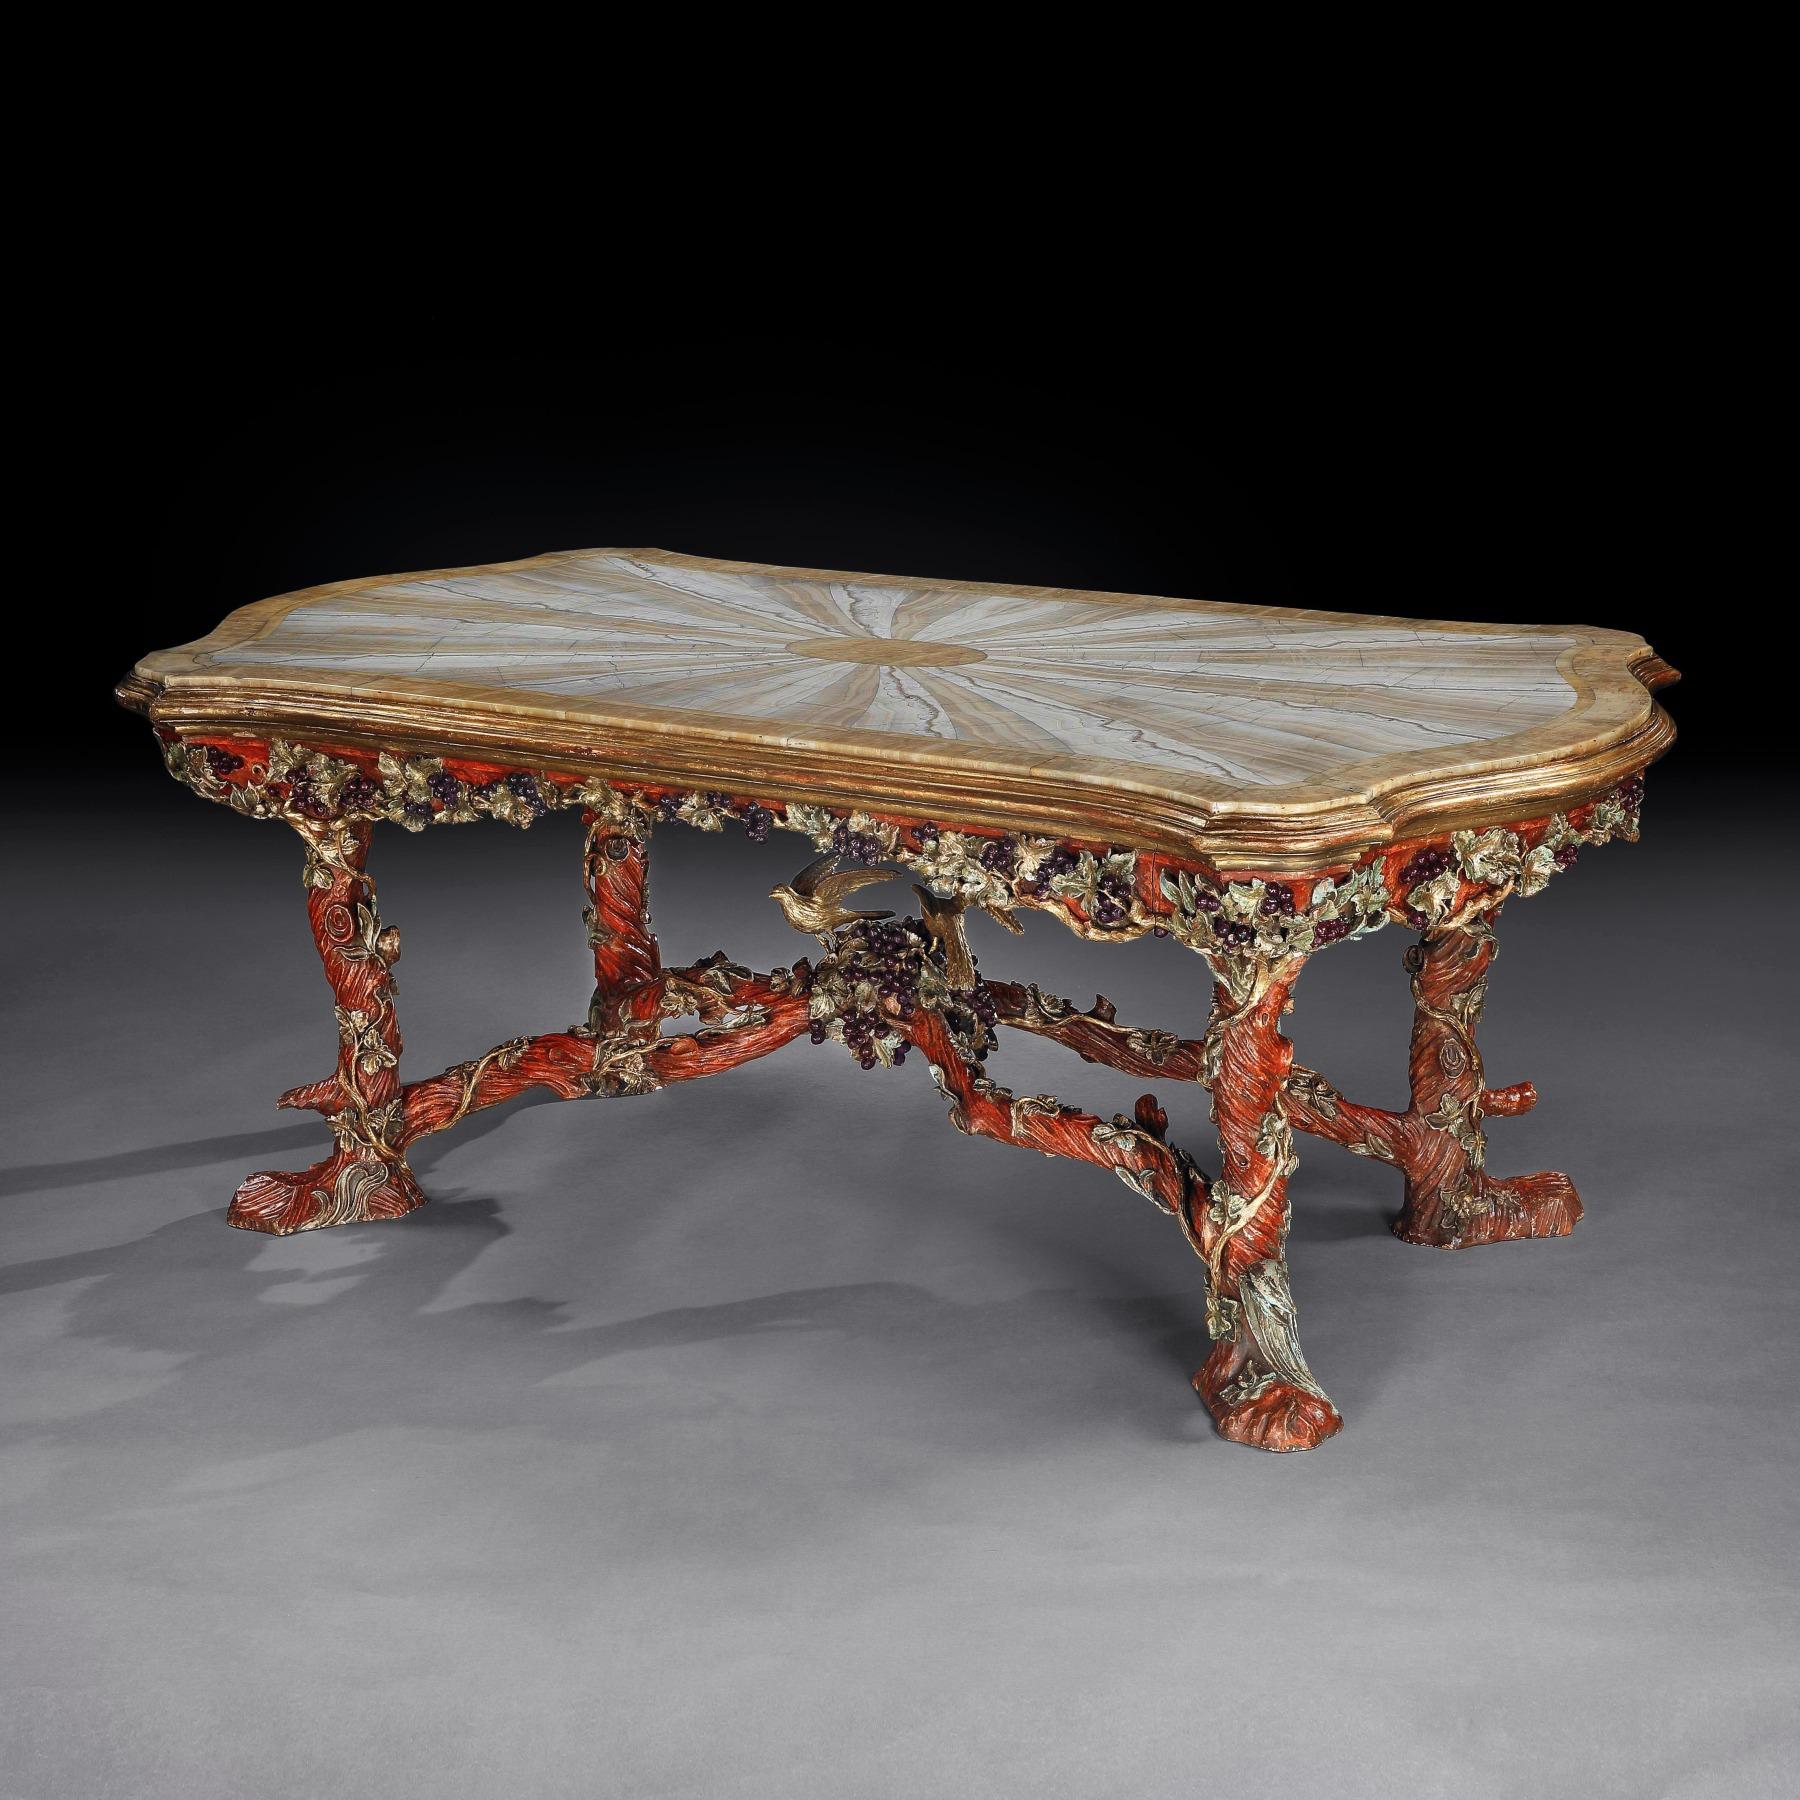 Outstanding Italian Carved Wood Polychrome Centre Table with Onyx Top by Amulet  In Good Condition For Sale In Benington, Herts